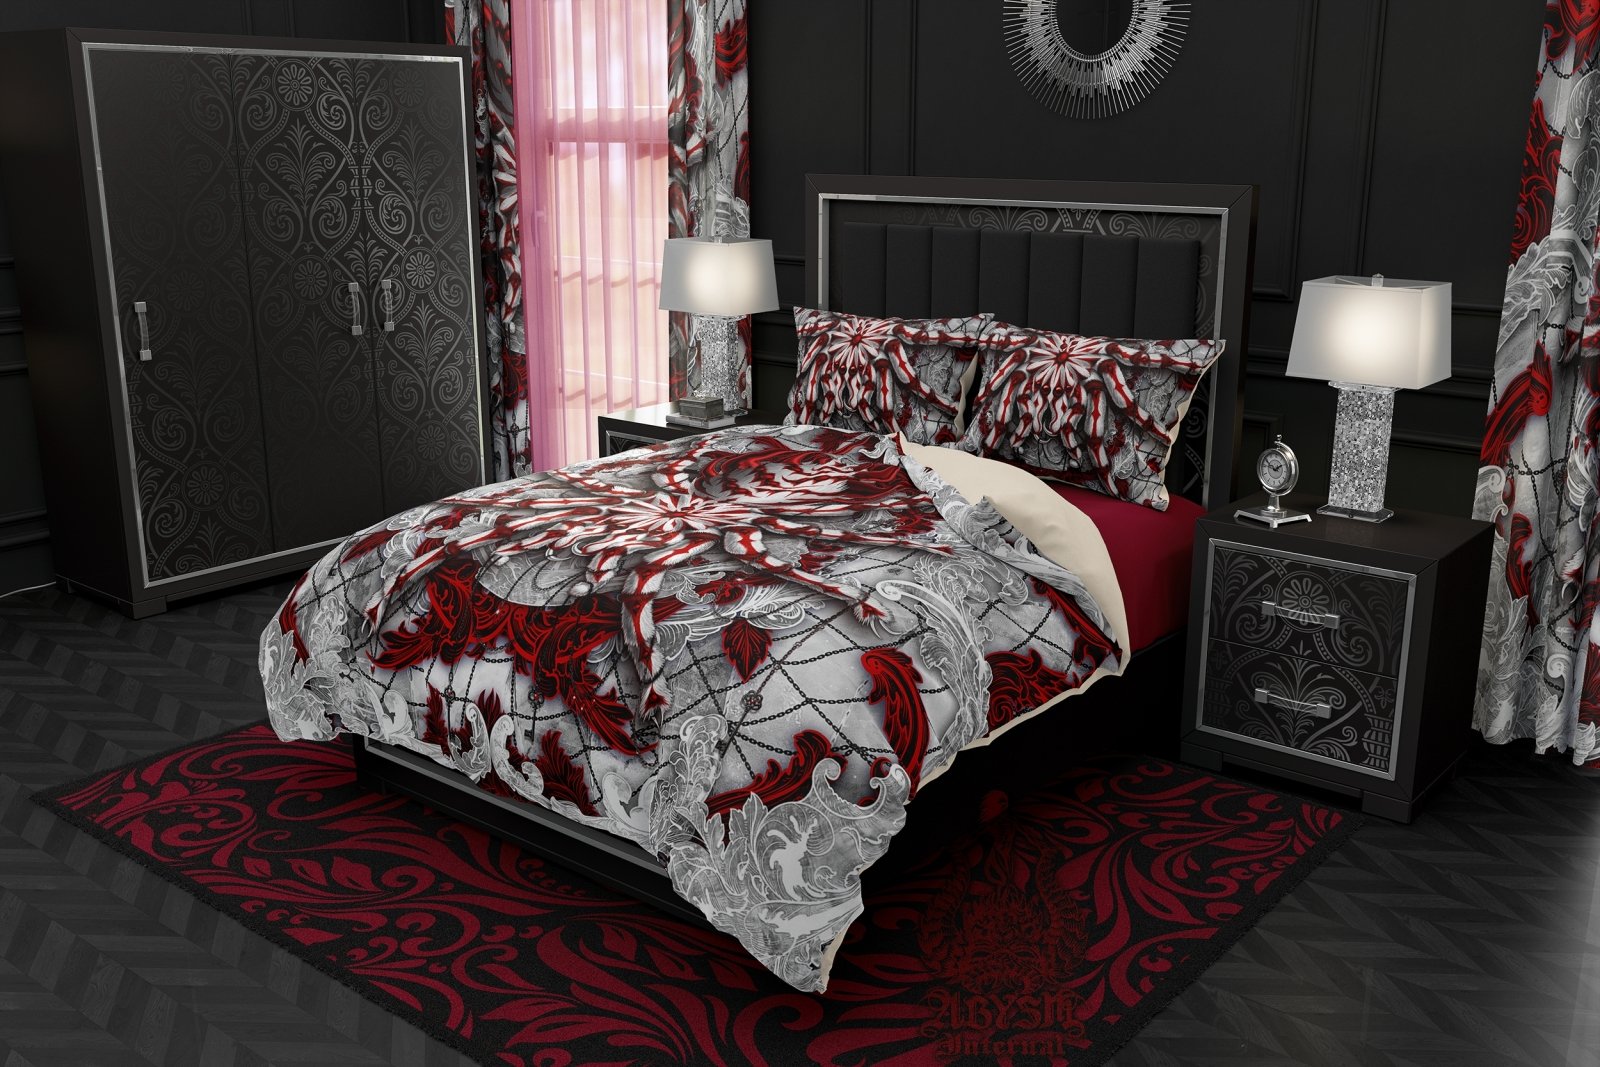 Gothic Spider Bedding Set, Comforter and Duvet, Bed Cover and Bedroom Decor, King, Queen and Twin Size - Tarantula Bloody White Goth - Abysm Internal